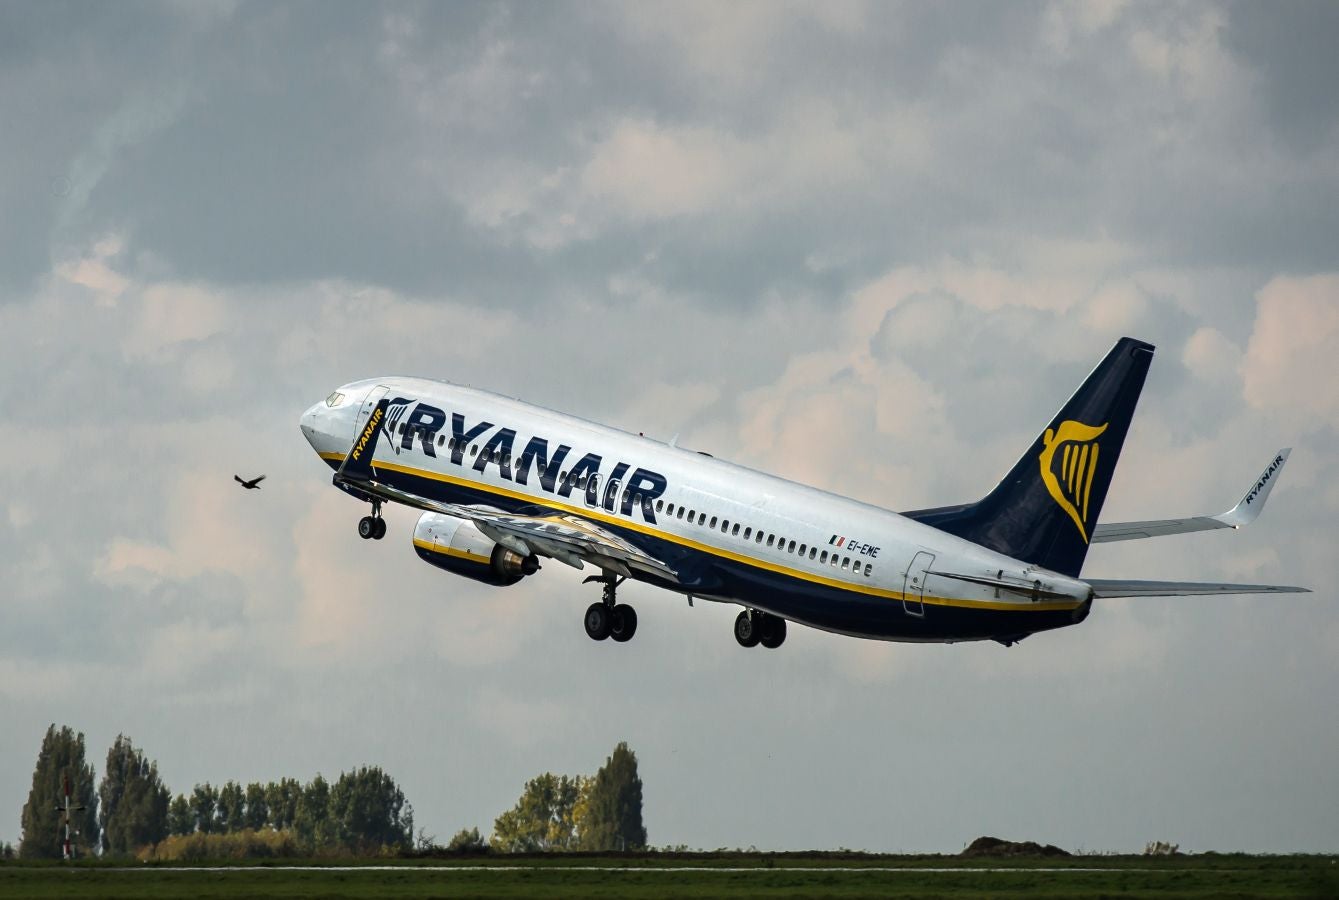 Ryanair bought a number of Boeings after 9/11